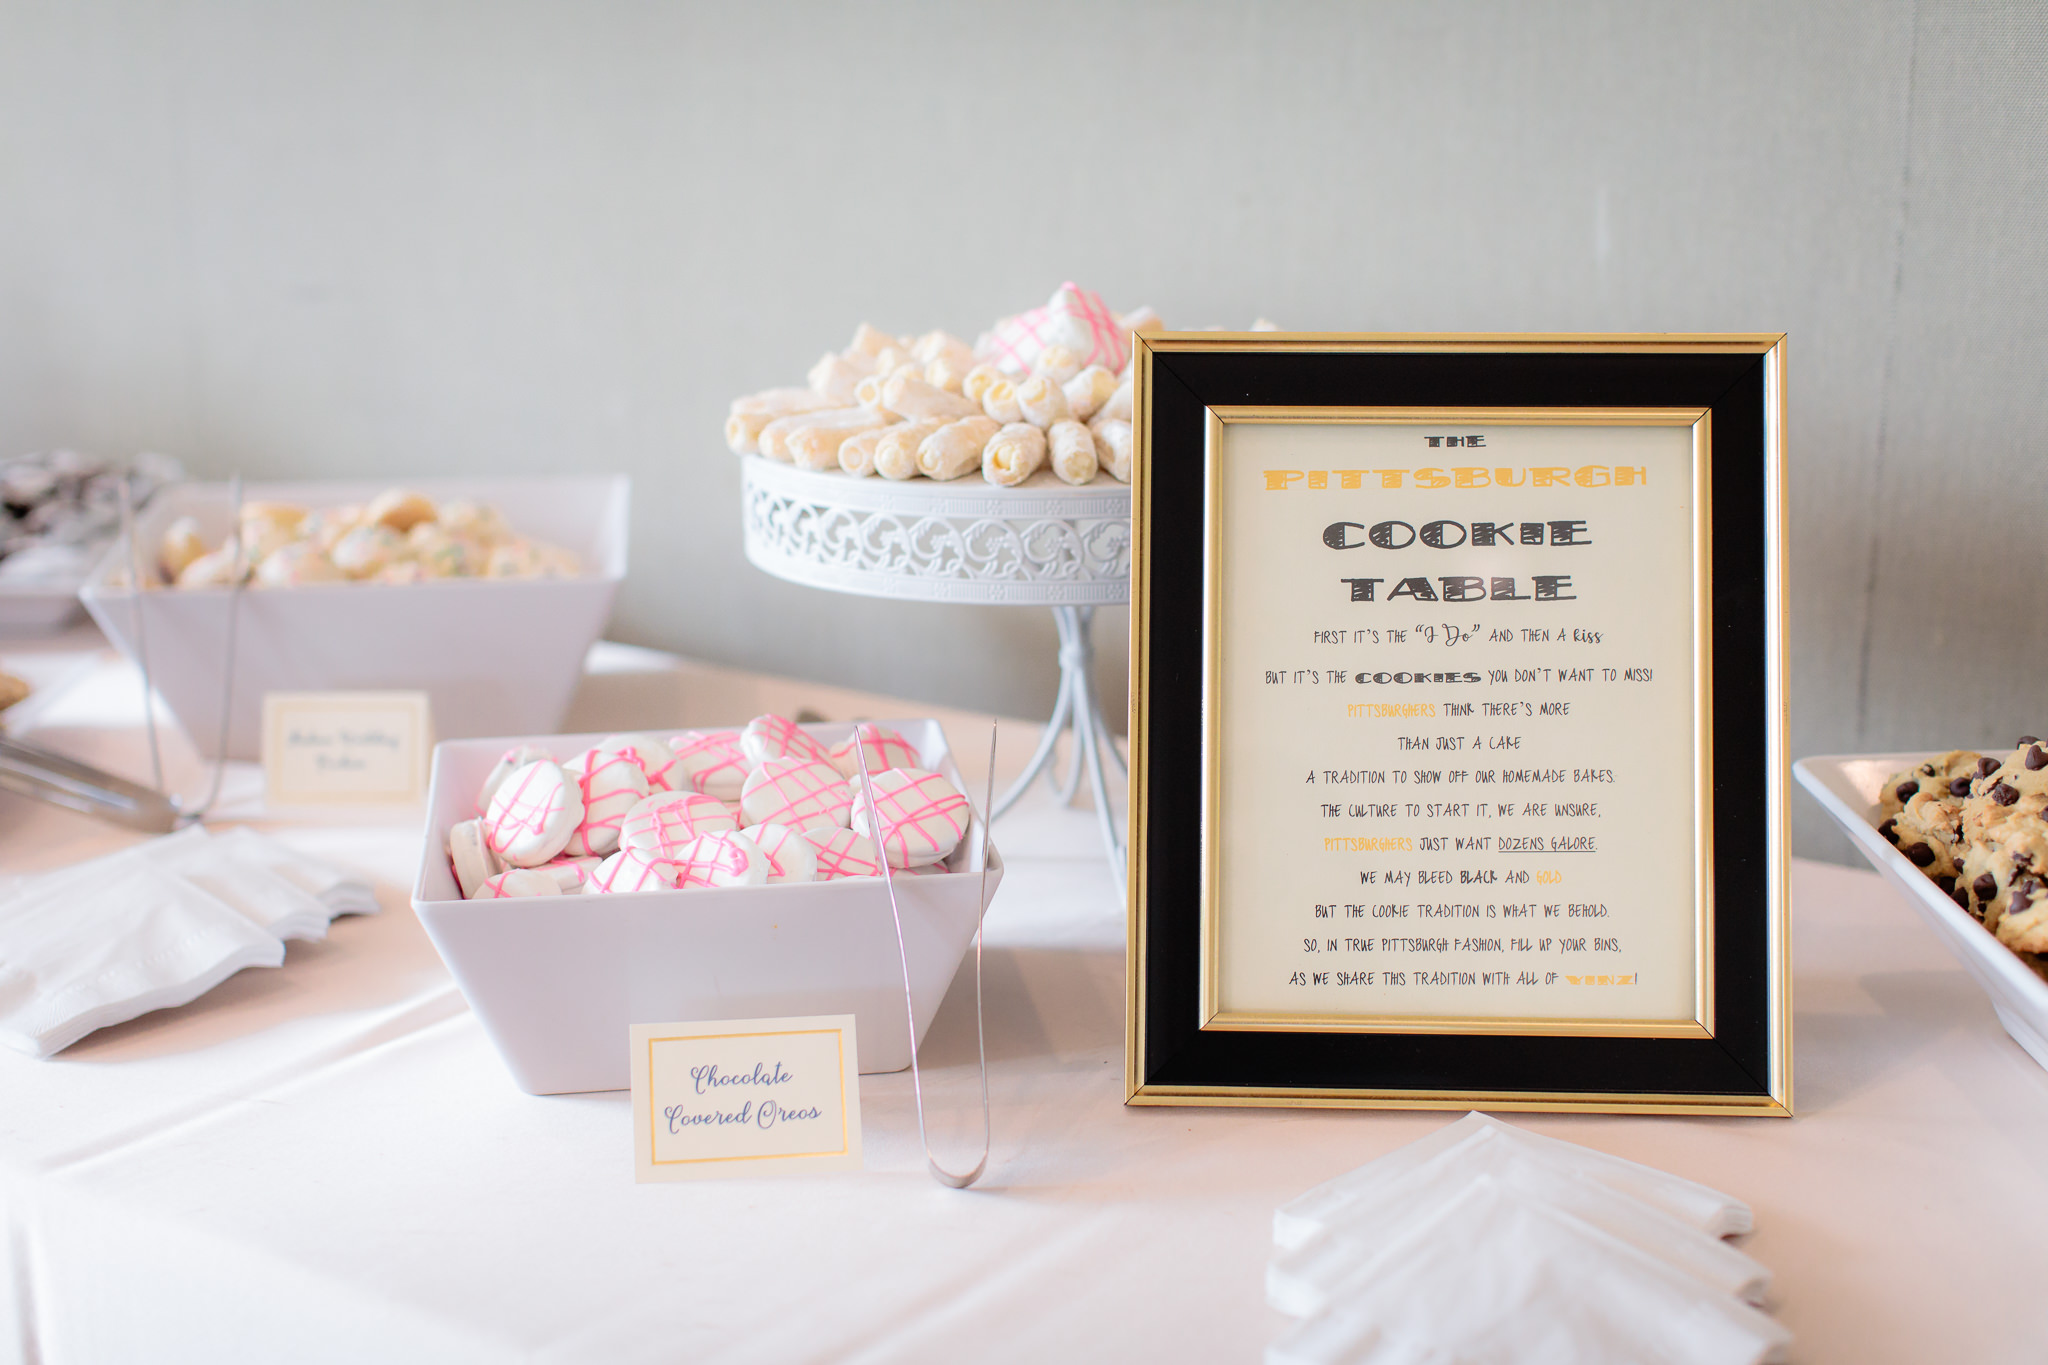 Pittsburgh cookie table sign at a Duquesne University wedding reception